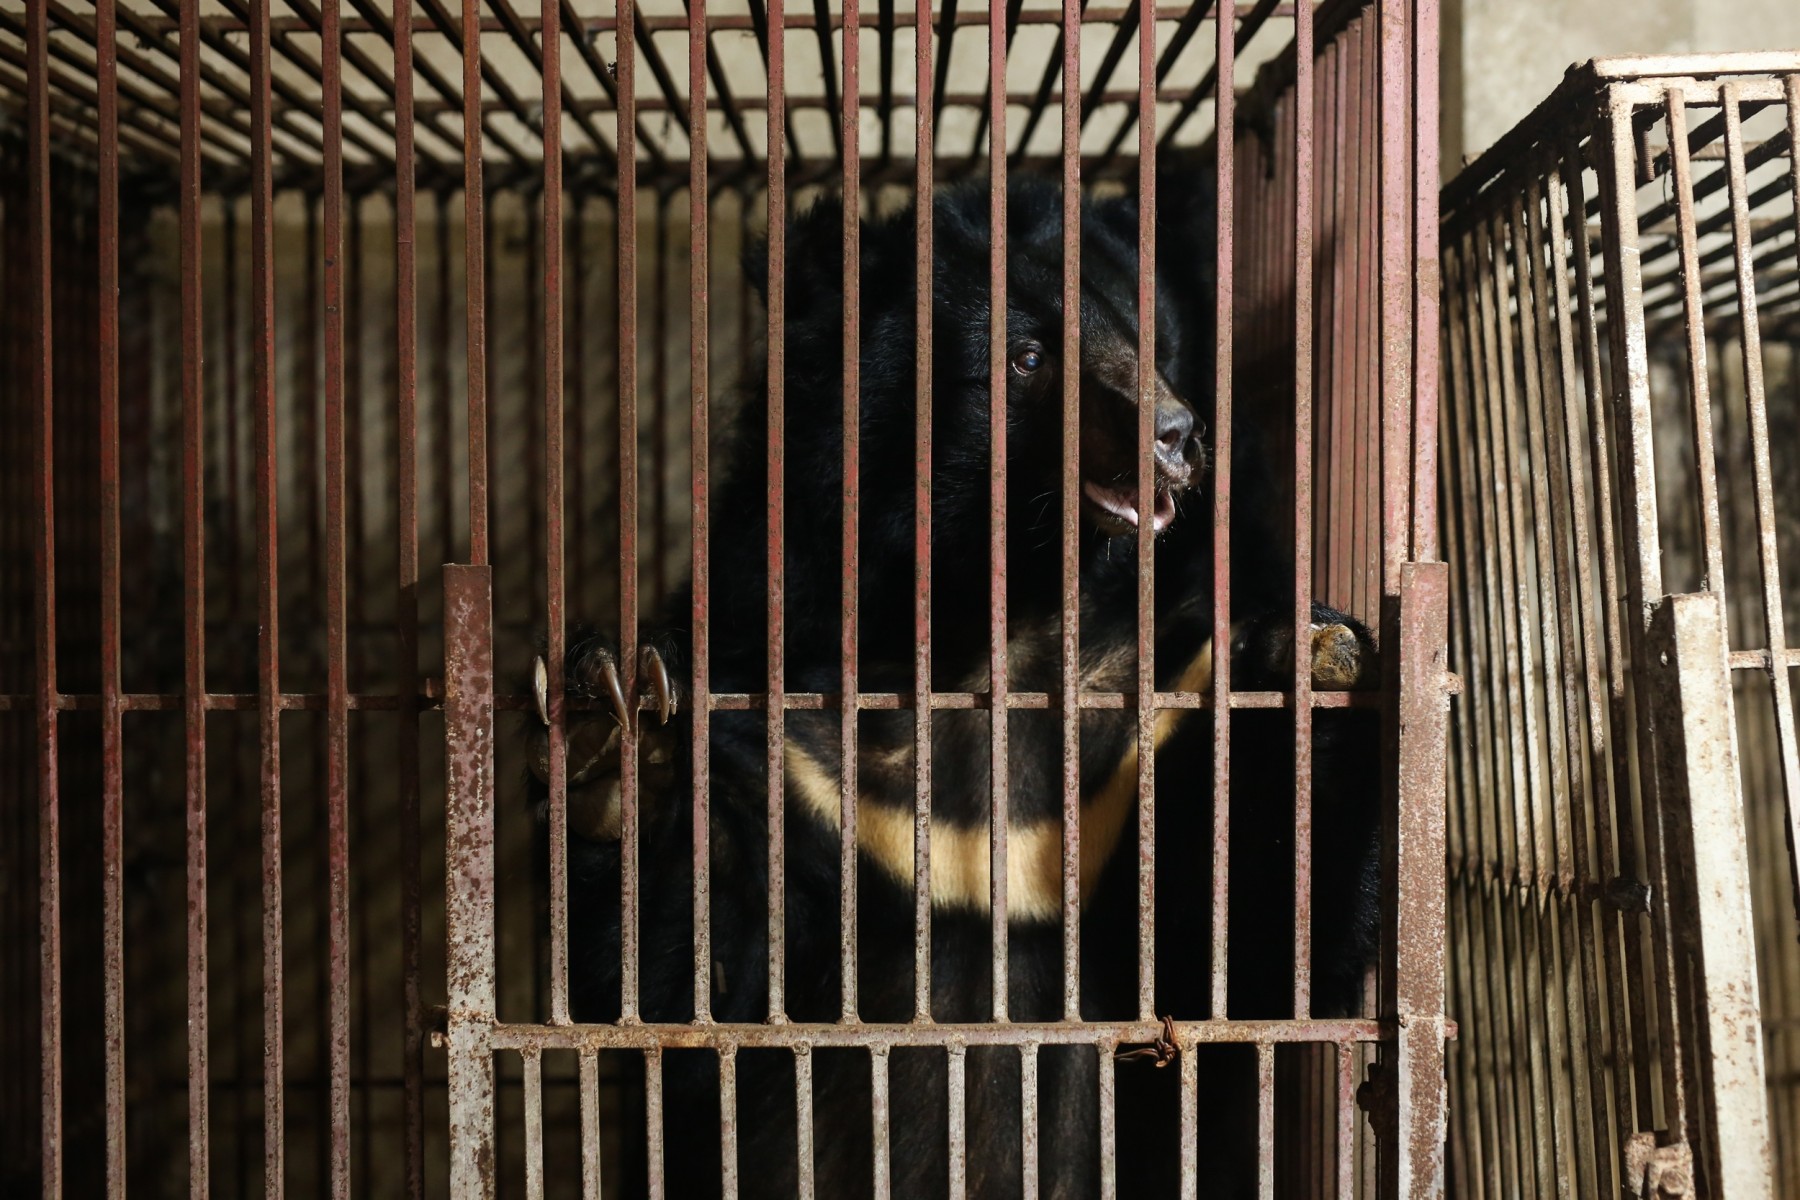 Minu the bear, in her cage prior to being rescued